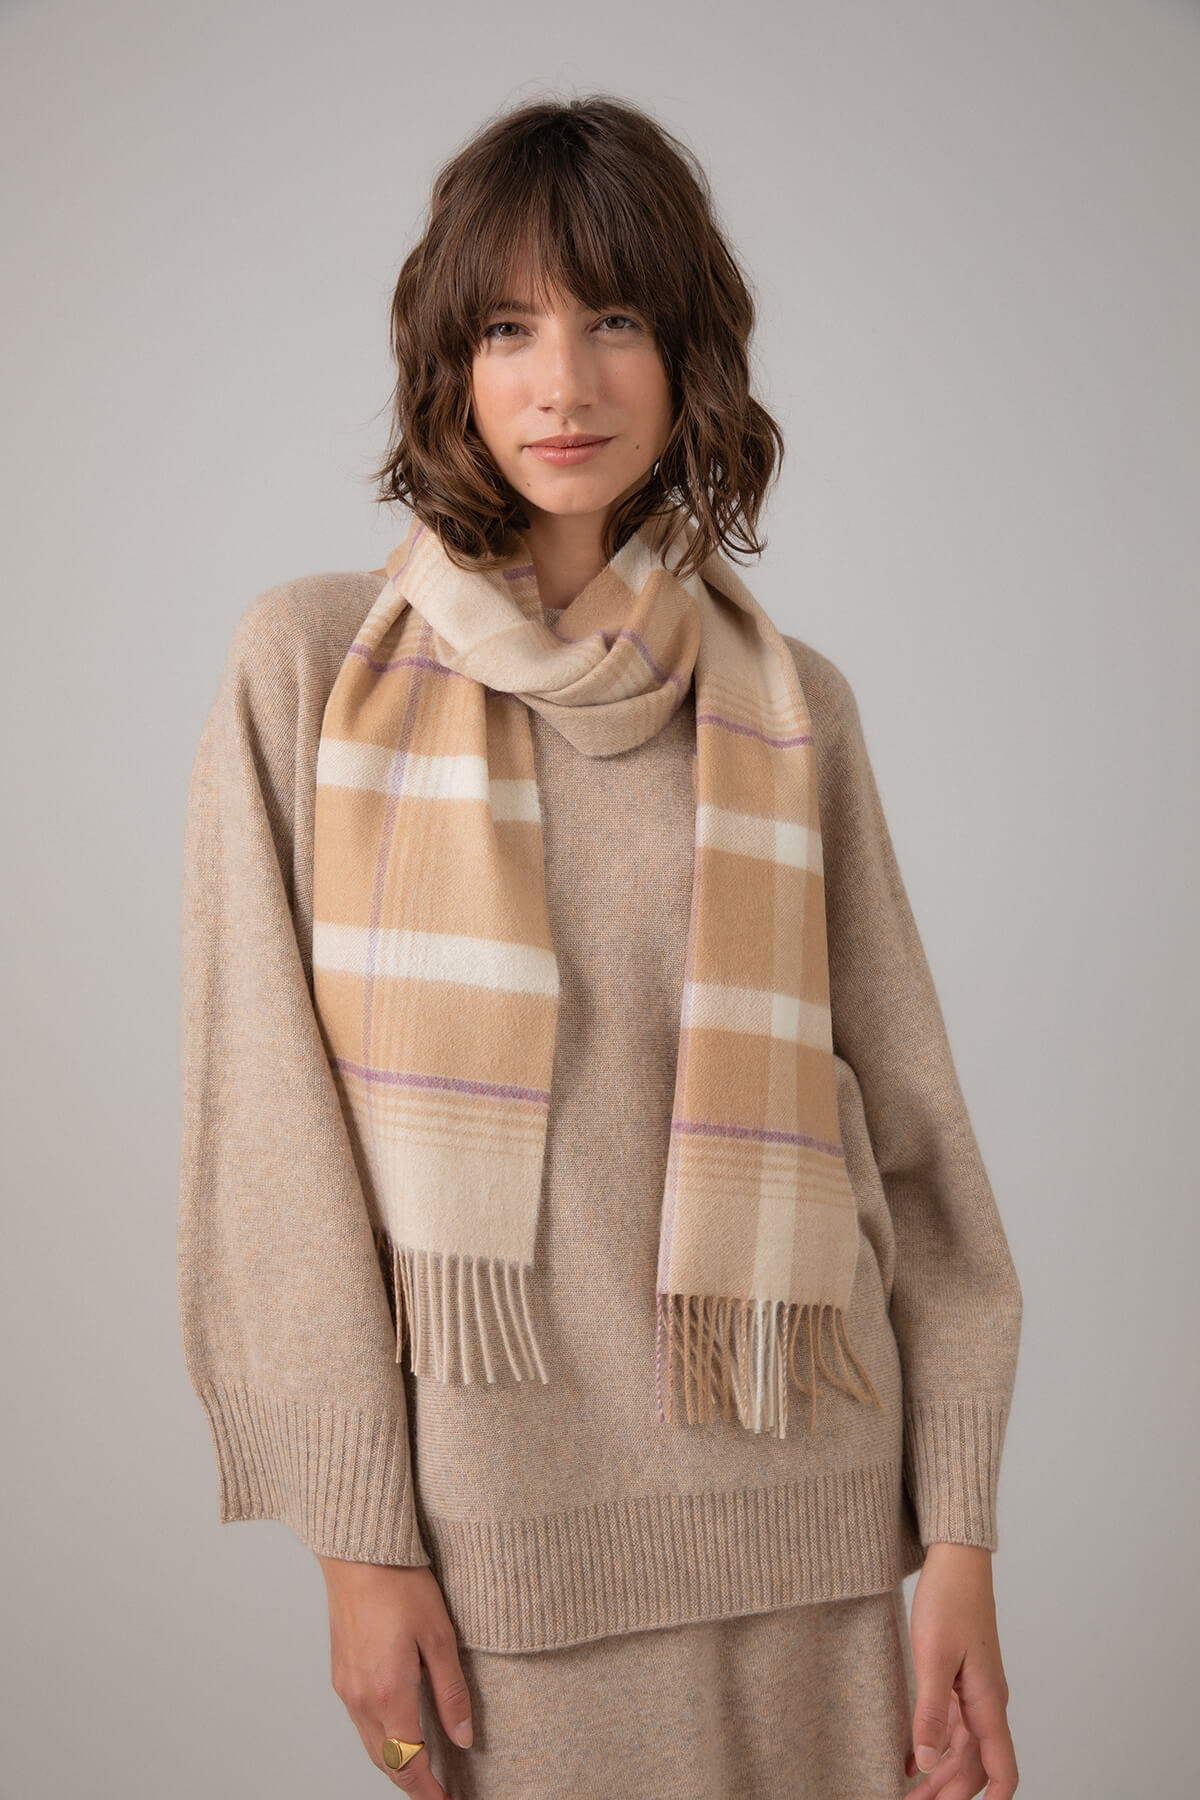 Model wearing Johnstons of Elgin Asymmetric Check Cashmere Scarf in Camel on a grey background WA000016RU7317ONE